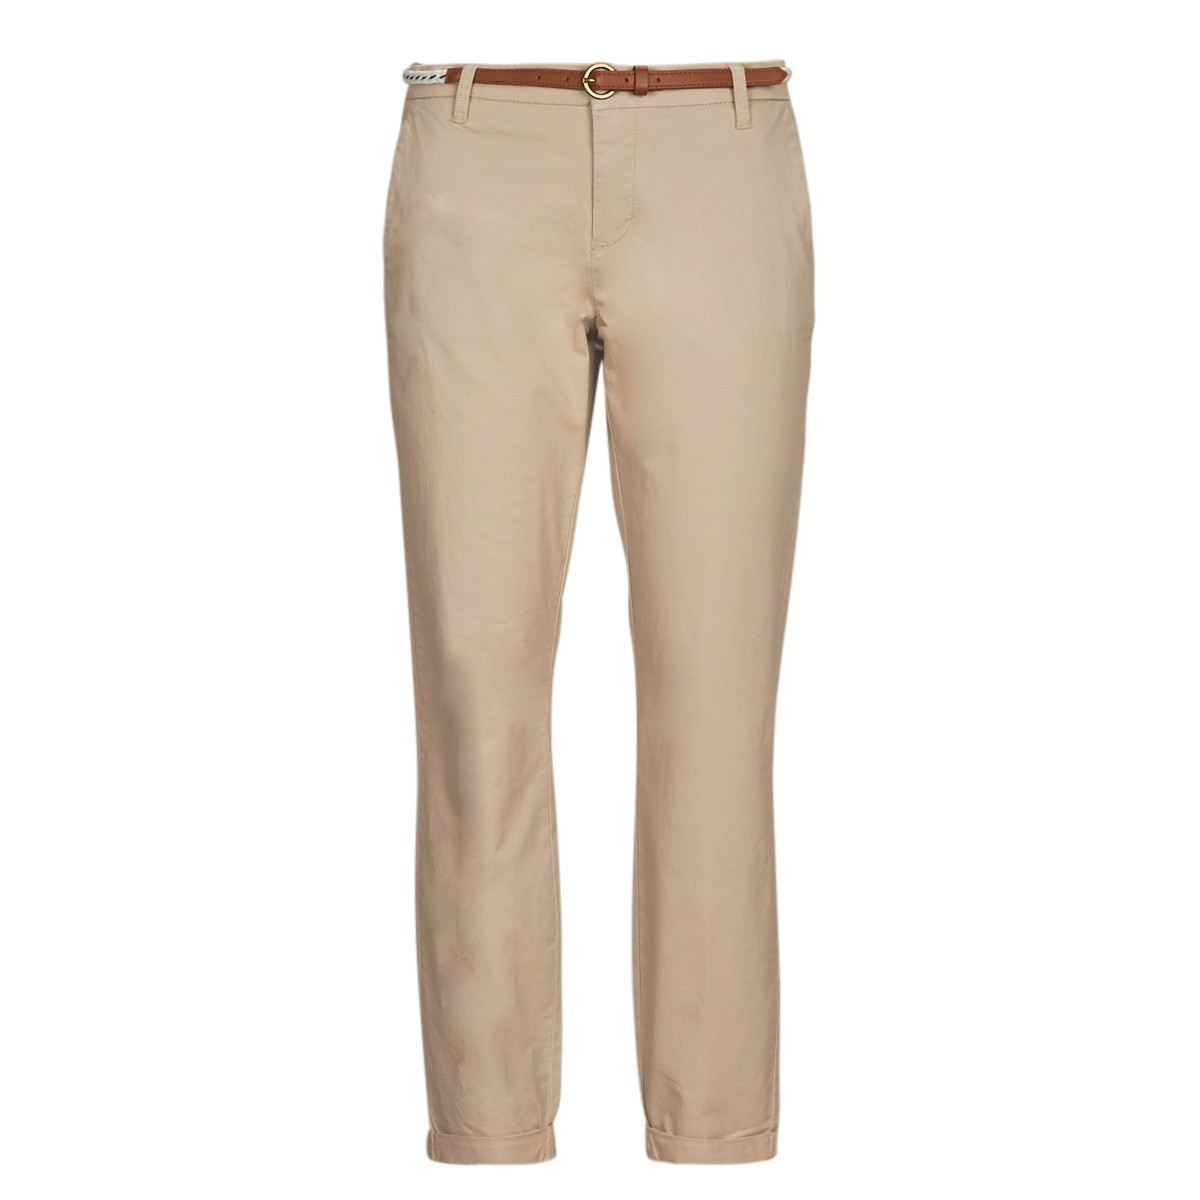 Only ONLBIANA COTTON BELT | Clothing - - delivery Women CC chinos Spartoo NET PNT Free CHINO Beige 